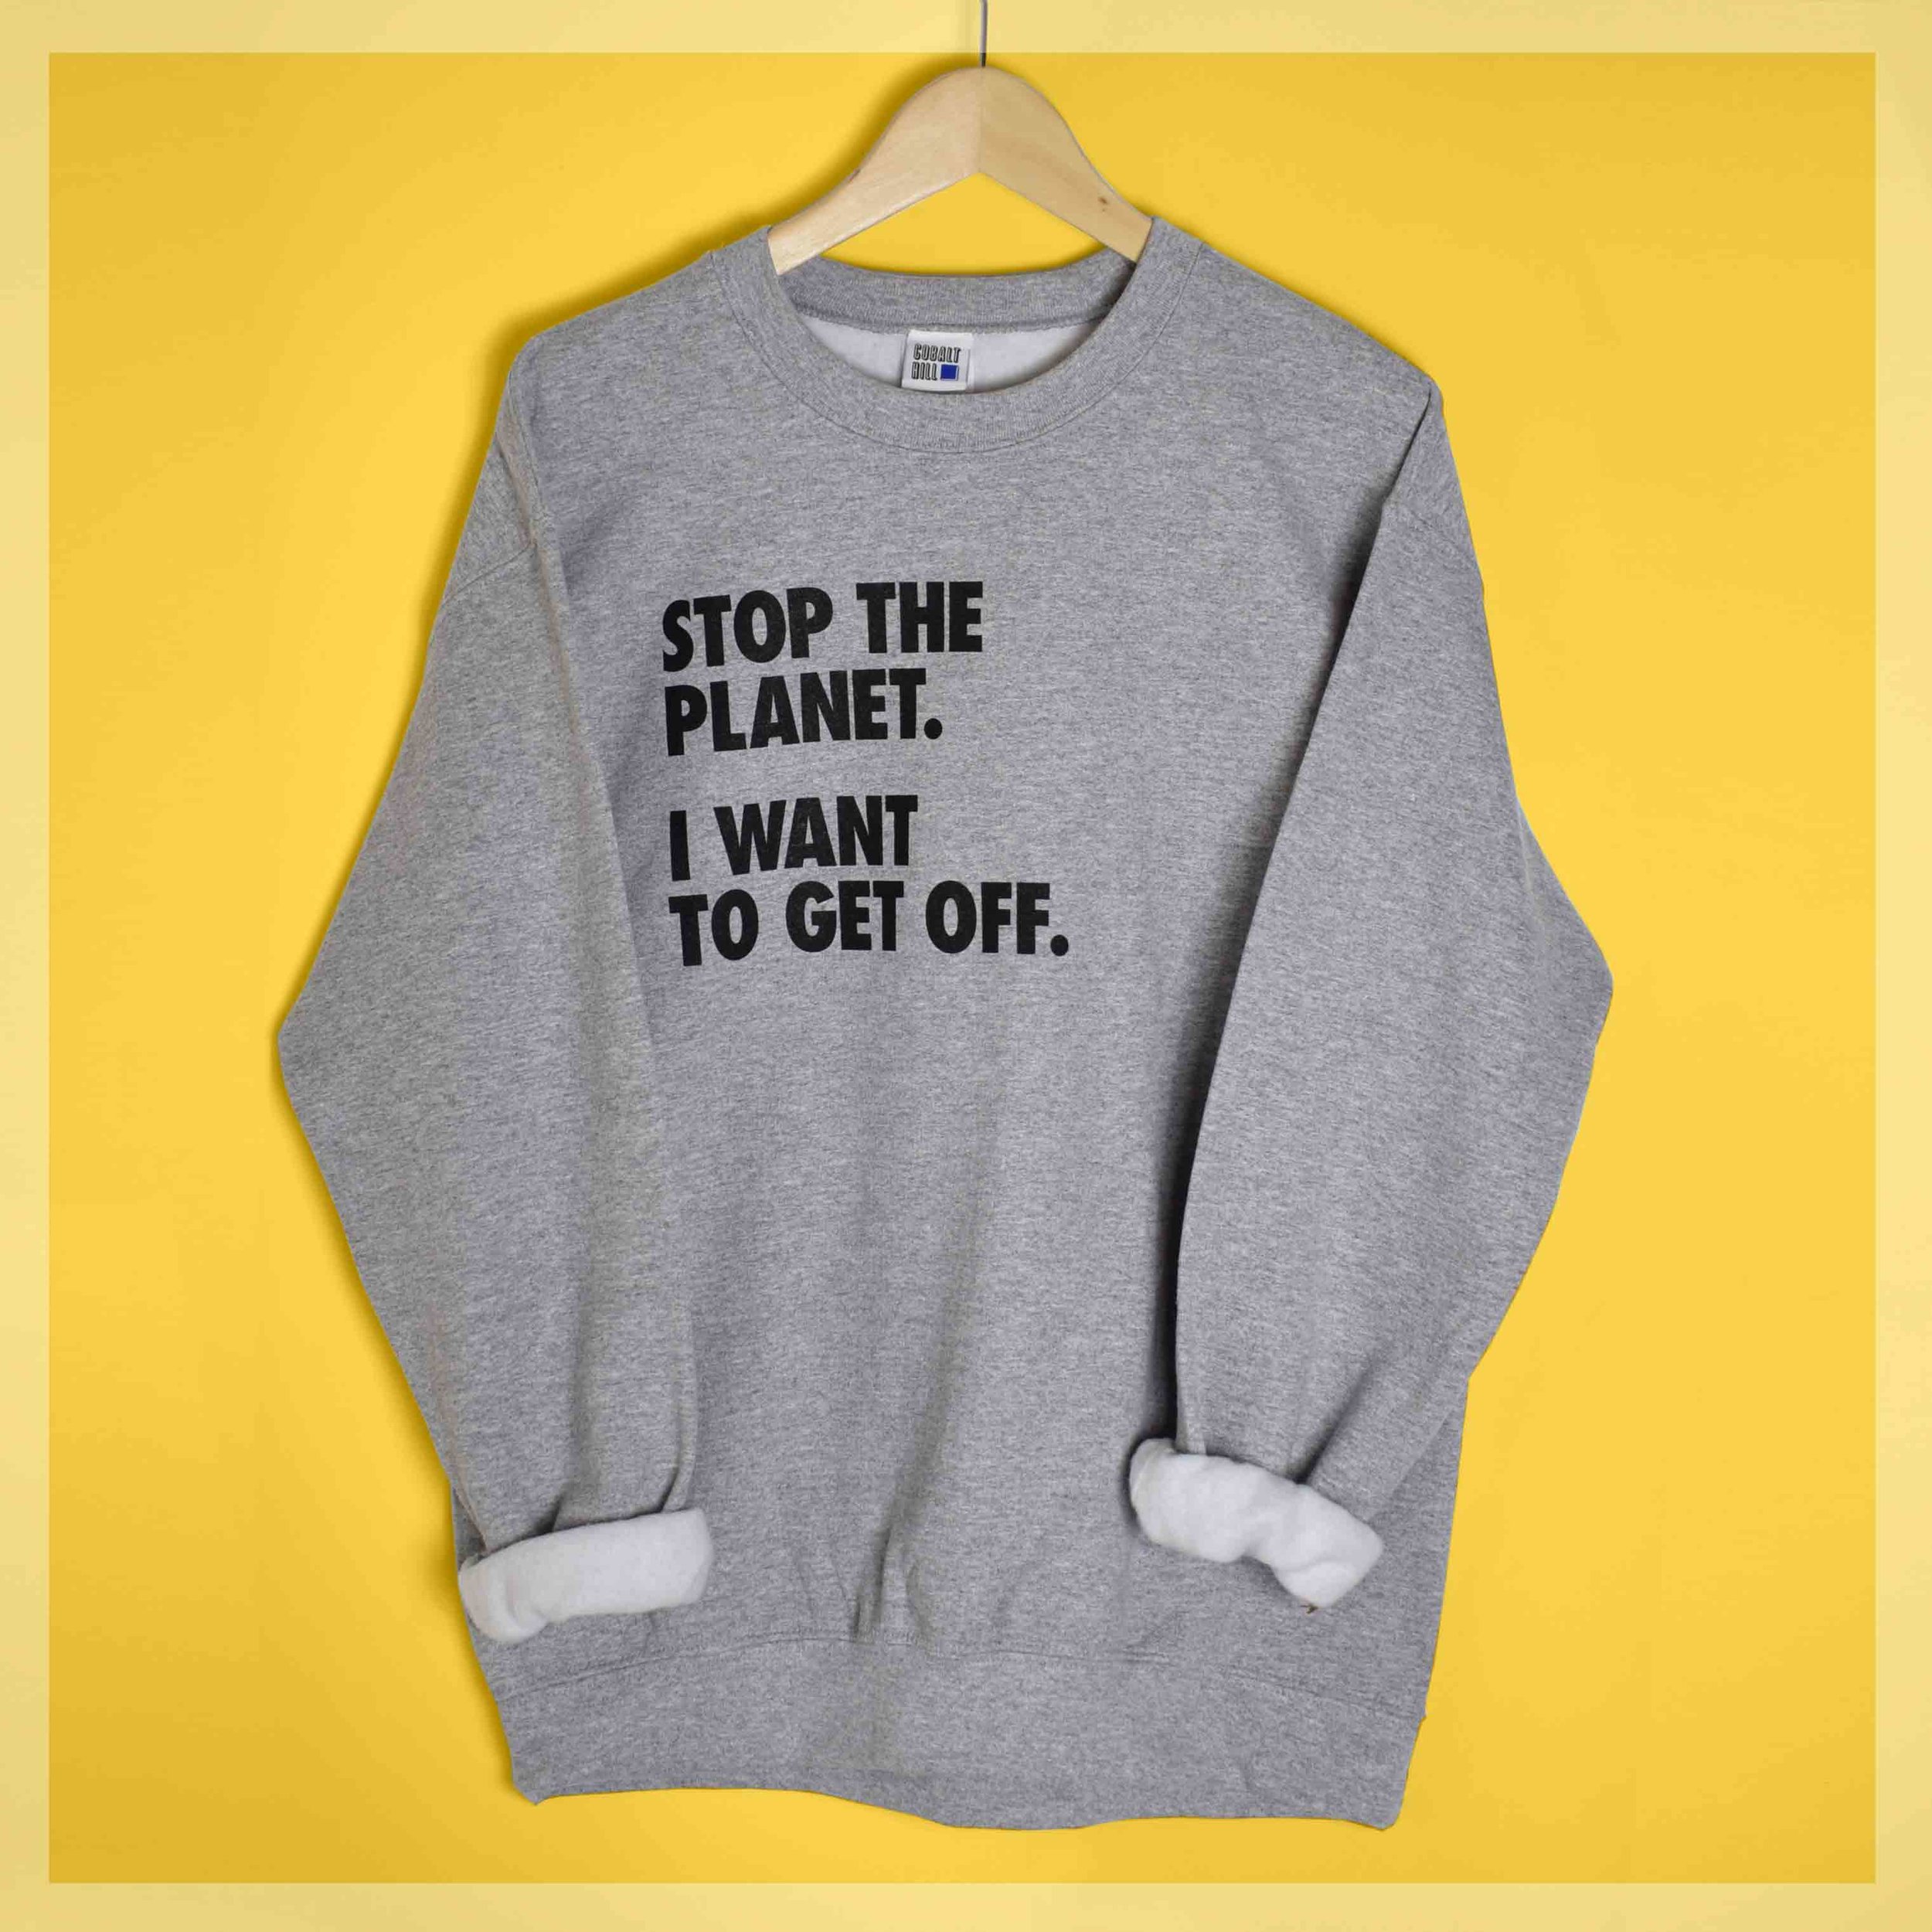 Stop-The-Planet-I-Want-to-Get-off-unisex-sweater-grey-screenprinted-in-London-Cobalt-Hill.jpg